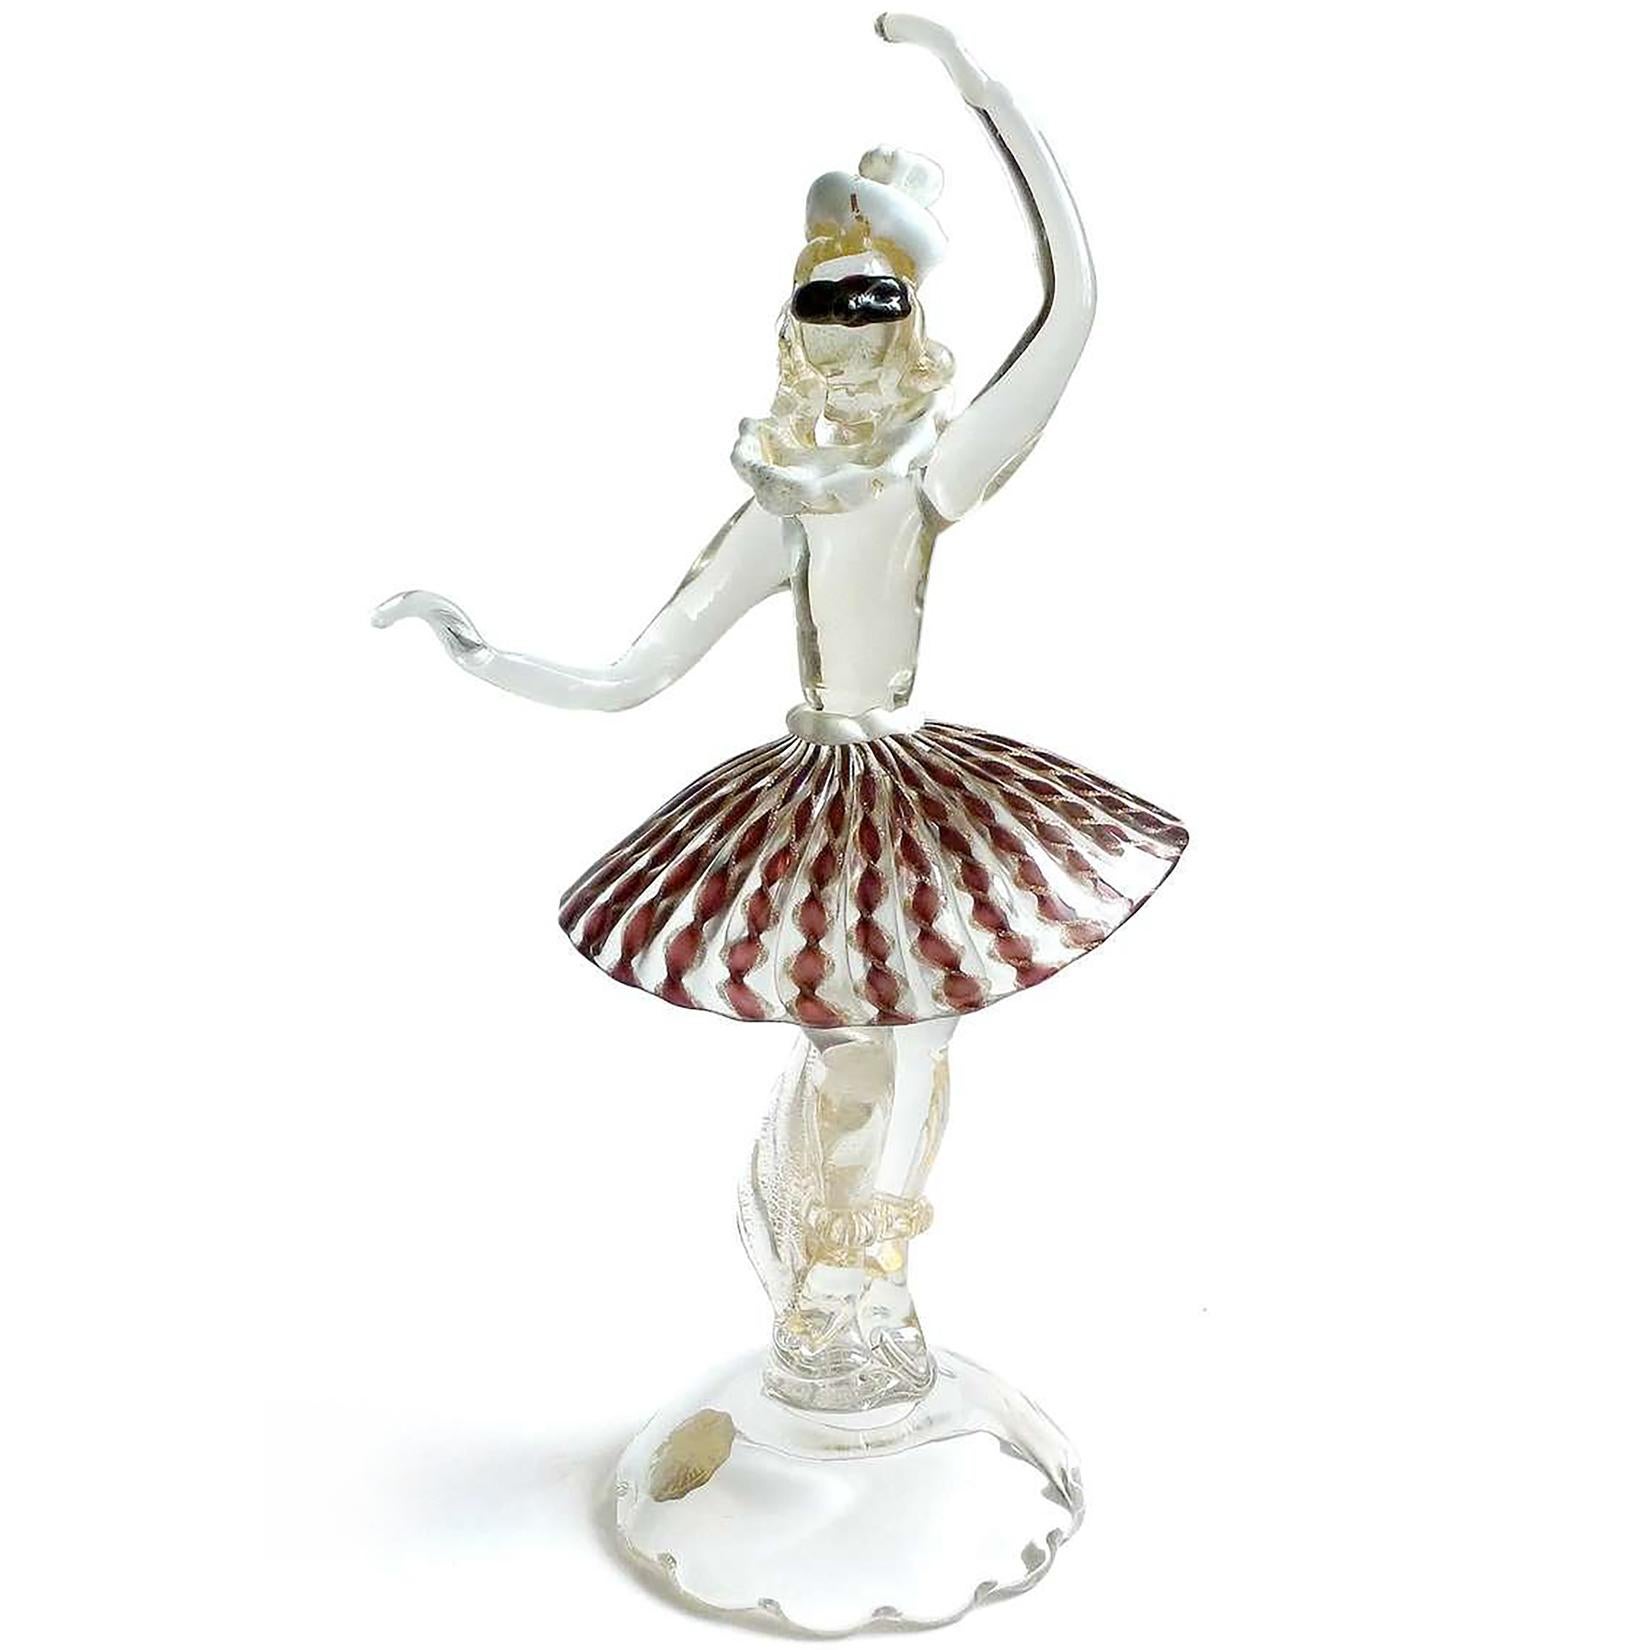 Beautiful and unique, vintage Murano hand blown Italian art glass dancing ballerina sculpture with harlequin mask, hat and Zanfirico ribbons skirt. Documented to the Salviati company, marked with an original 